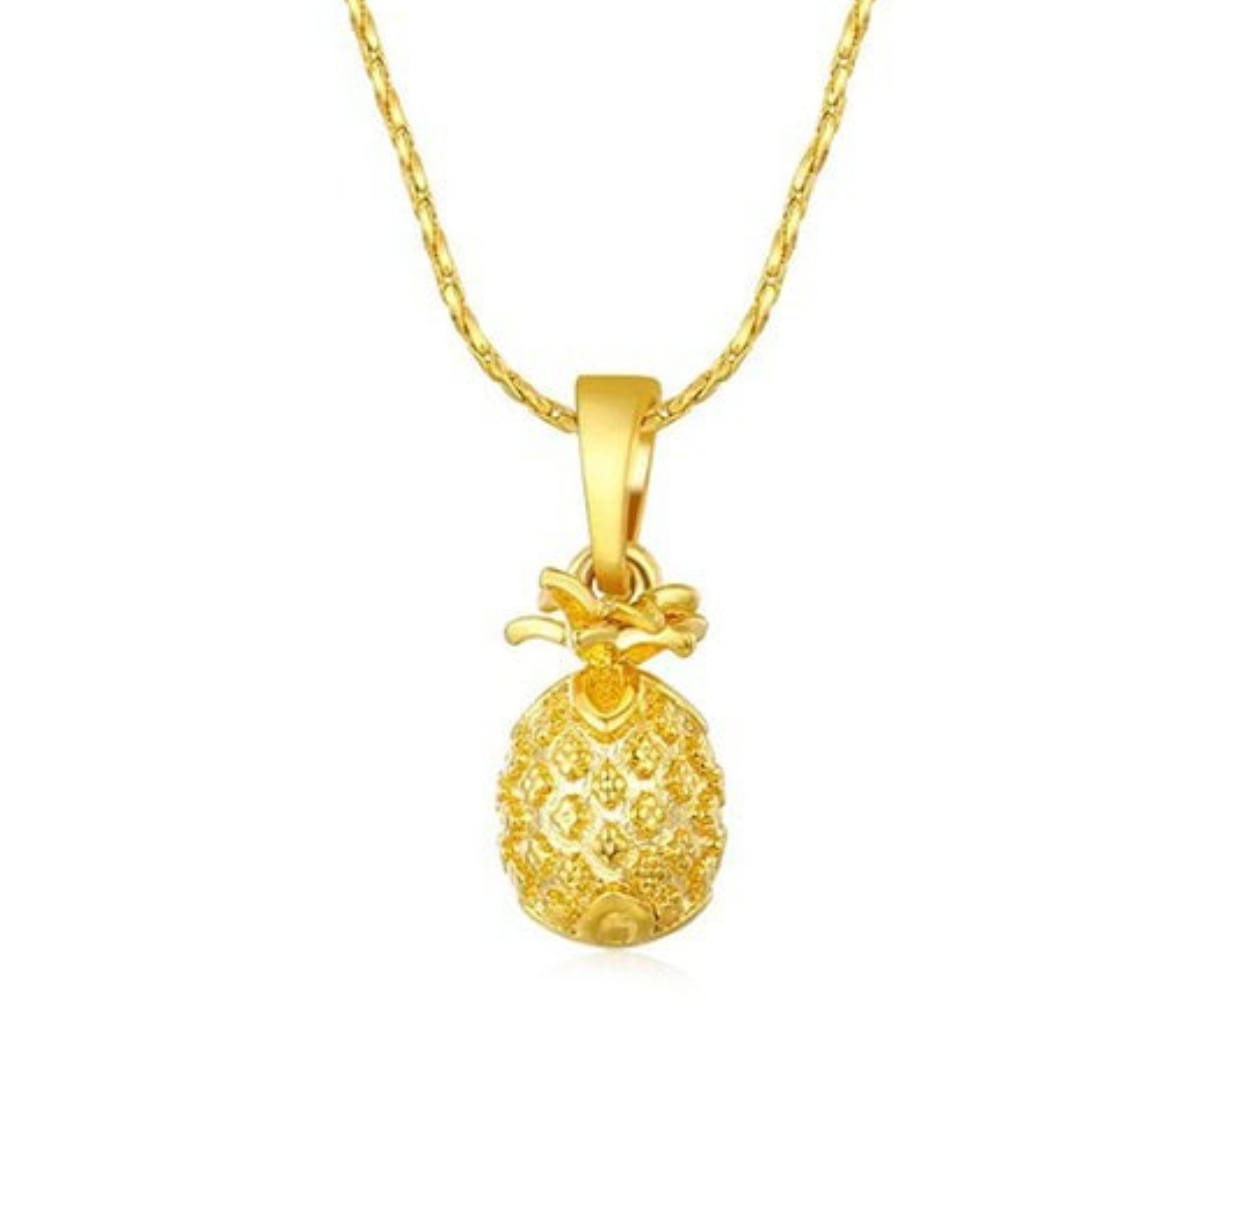 Pineapple Pendant Chain Necklace (An In-depth Review)